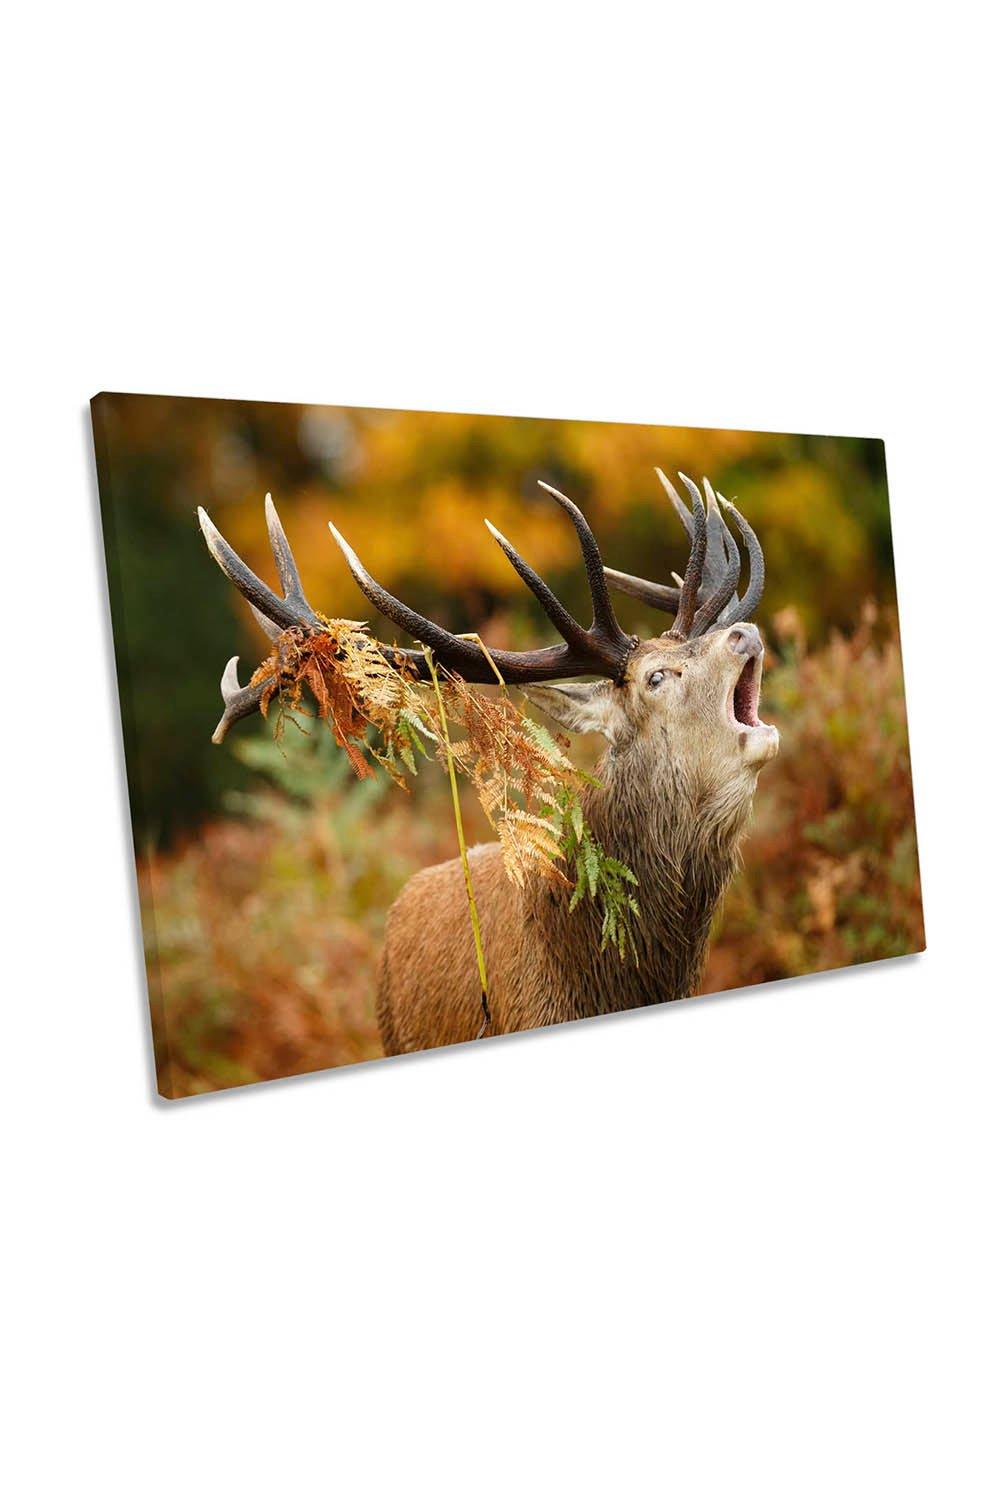 The Rut Antlers Stag Wildlife Deer Canvas Wall Art Picture Print